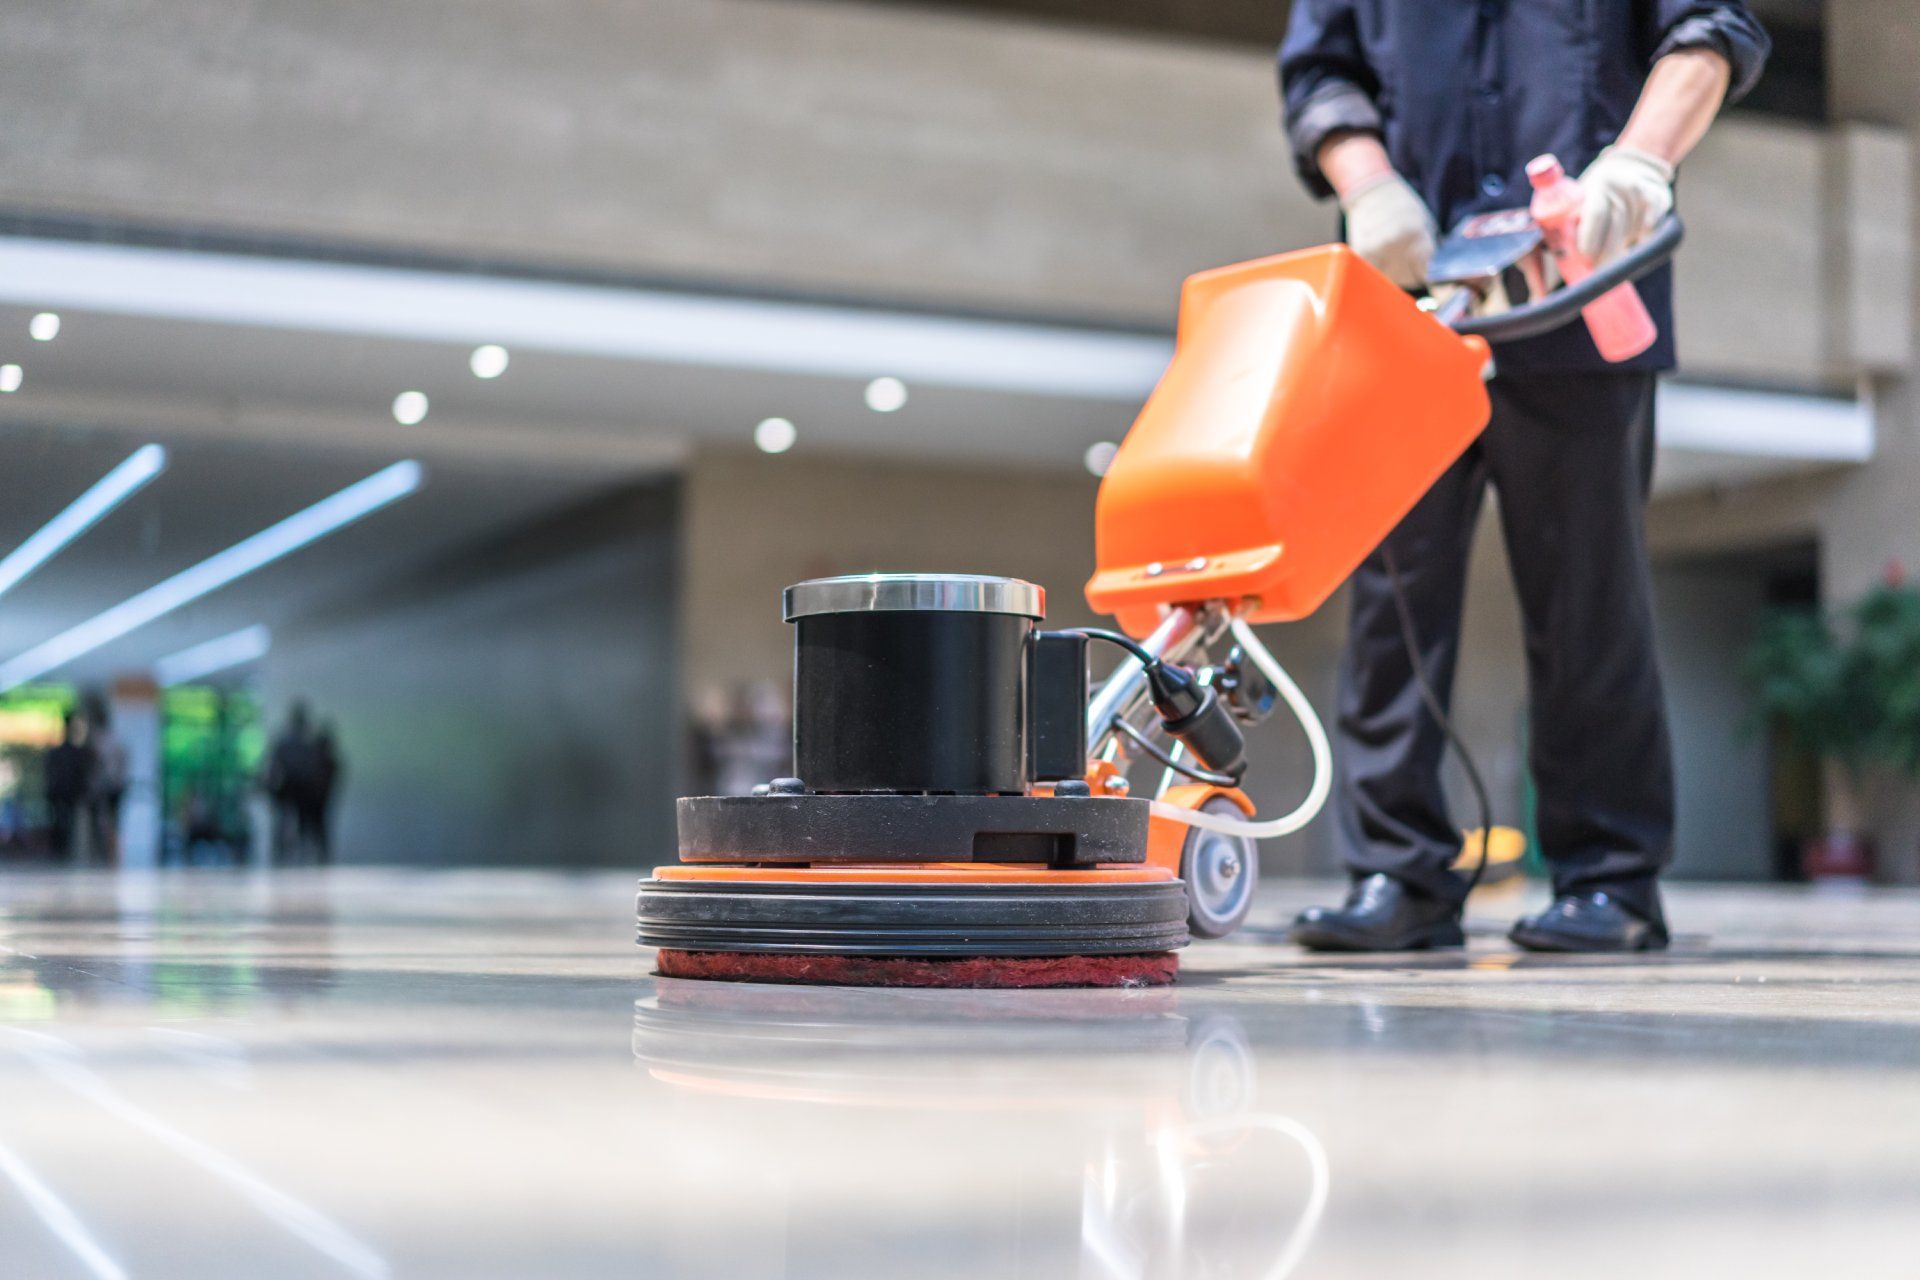 Large Areas Require Commercial Floor Cleaning Machines